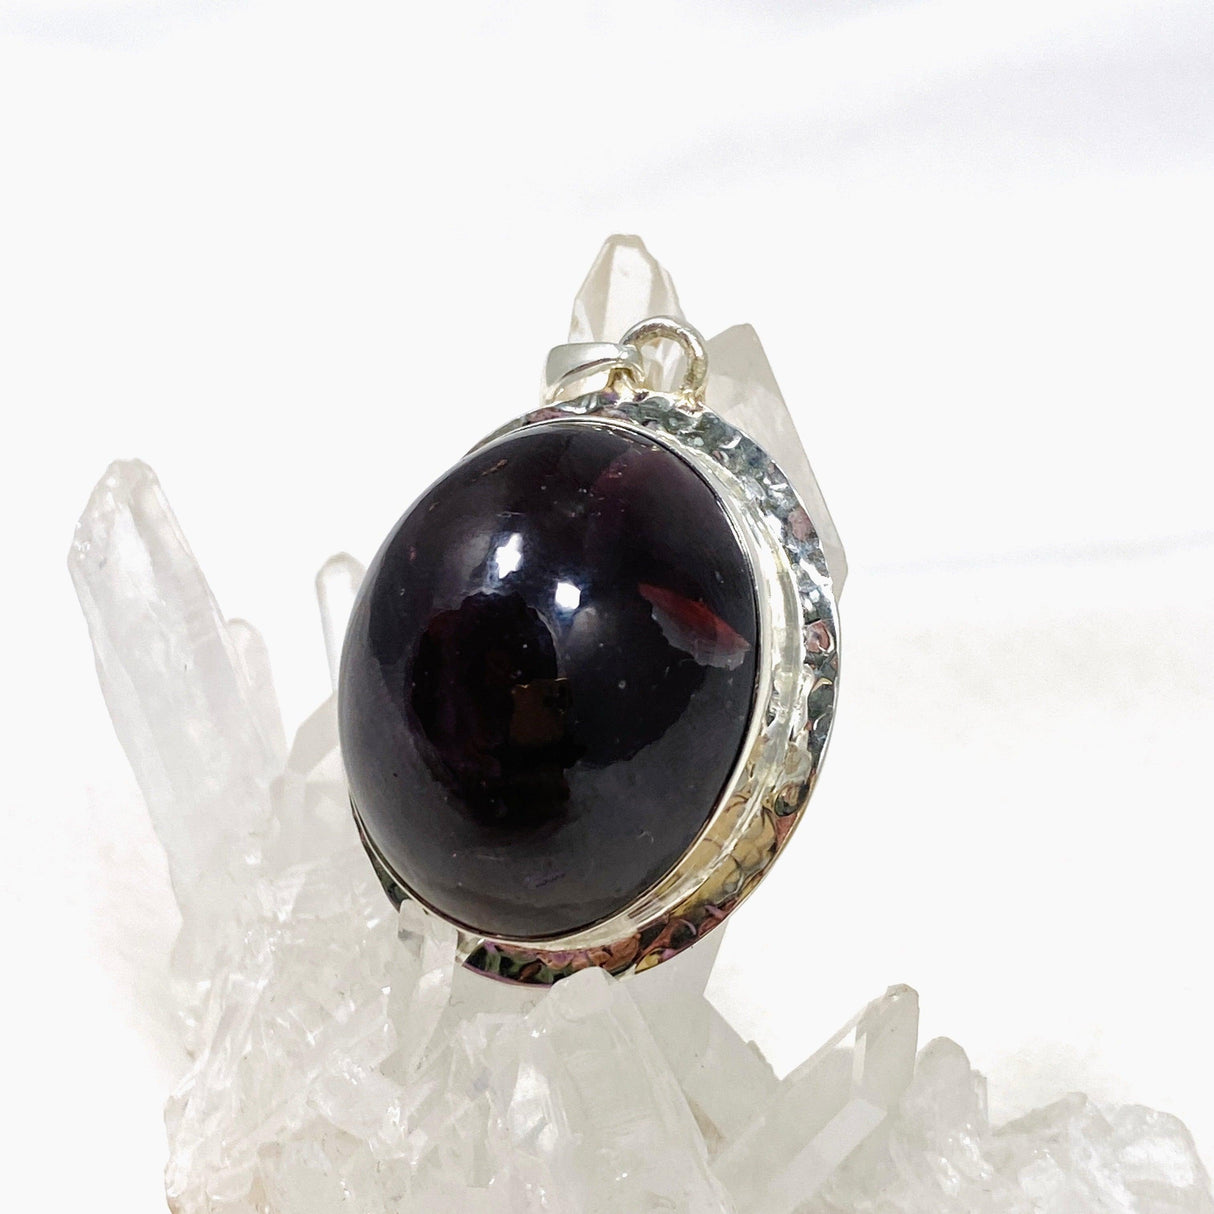 Star Garnet Oval Pendant with Hammered Setting KPGJ4228 - Nature's Magick